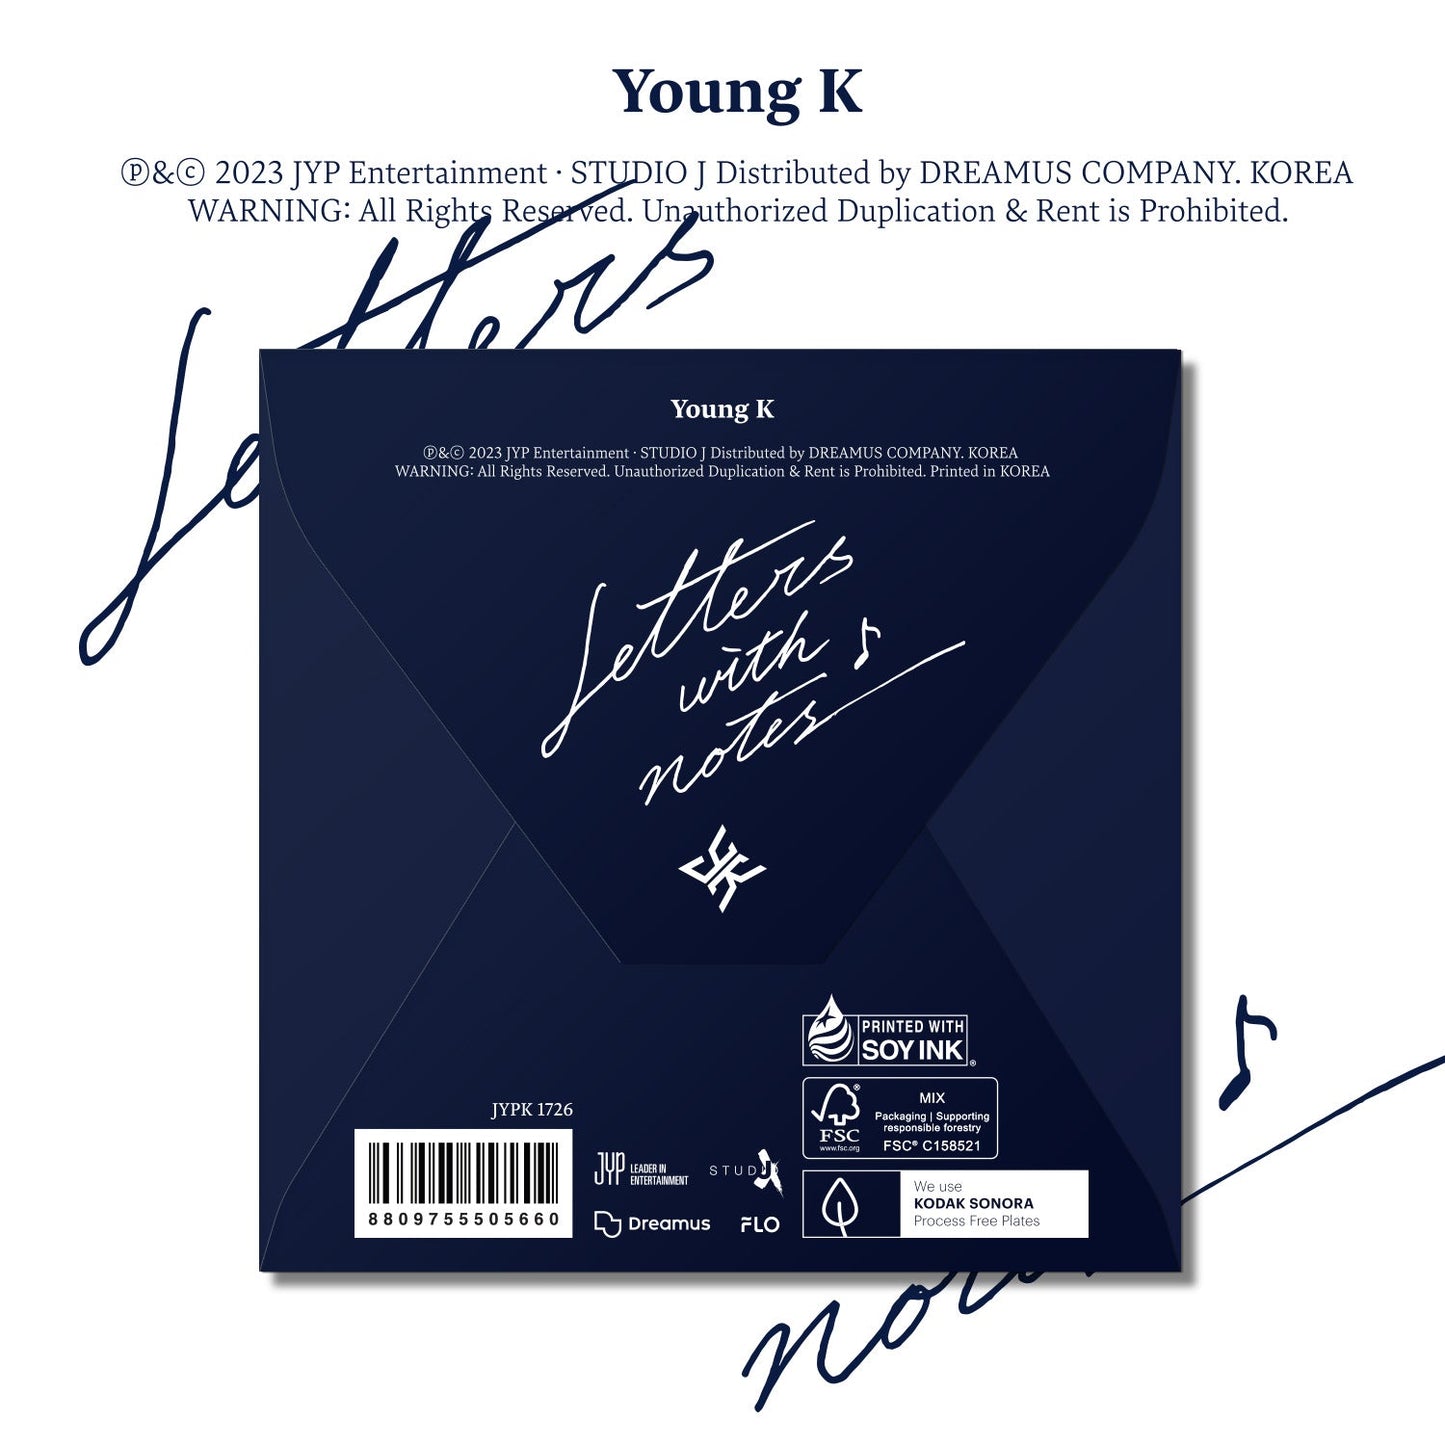 YOUNG K (DAY6) ALBUM 'LETTERS WITH NOTES' DIGIPACK VERSION COVER